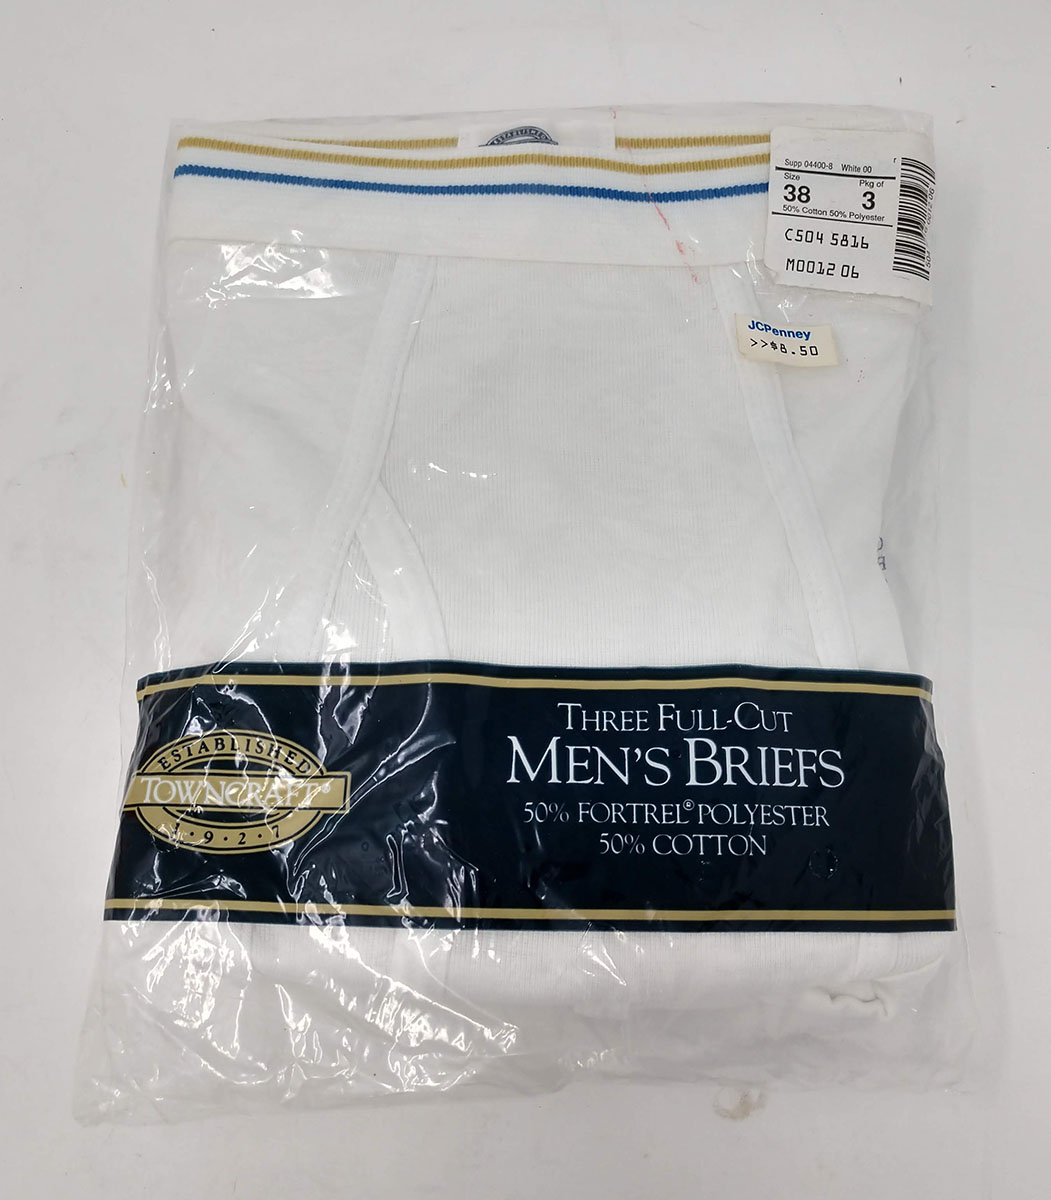 3 Full Cut Men's Briefs Towncraft Size 38 50% Cotton 50% Polyester